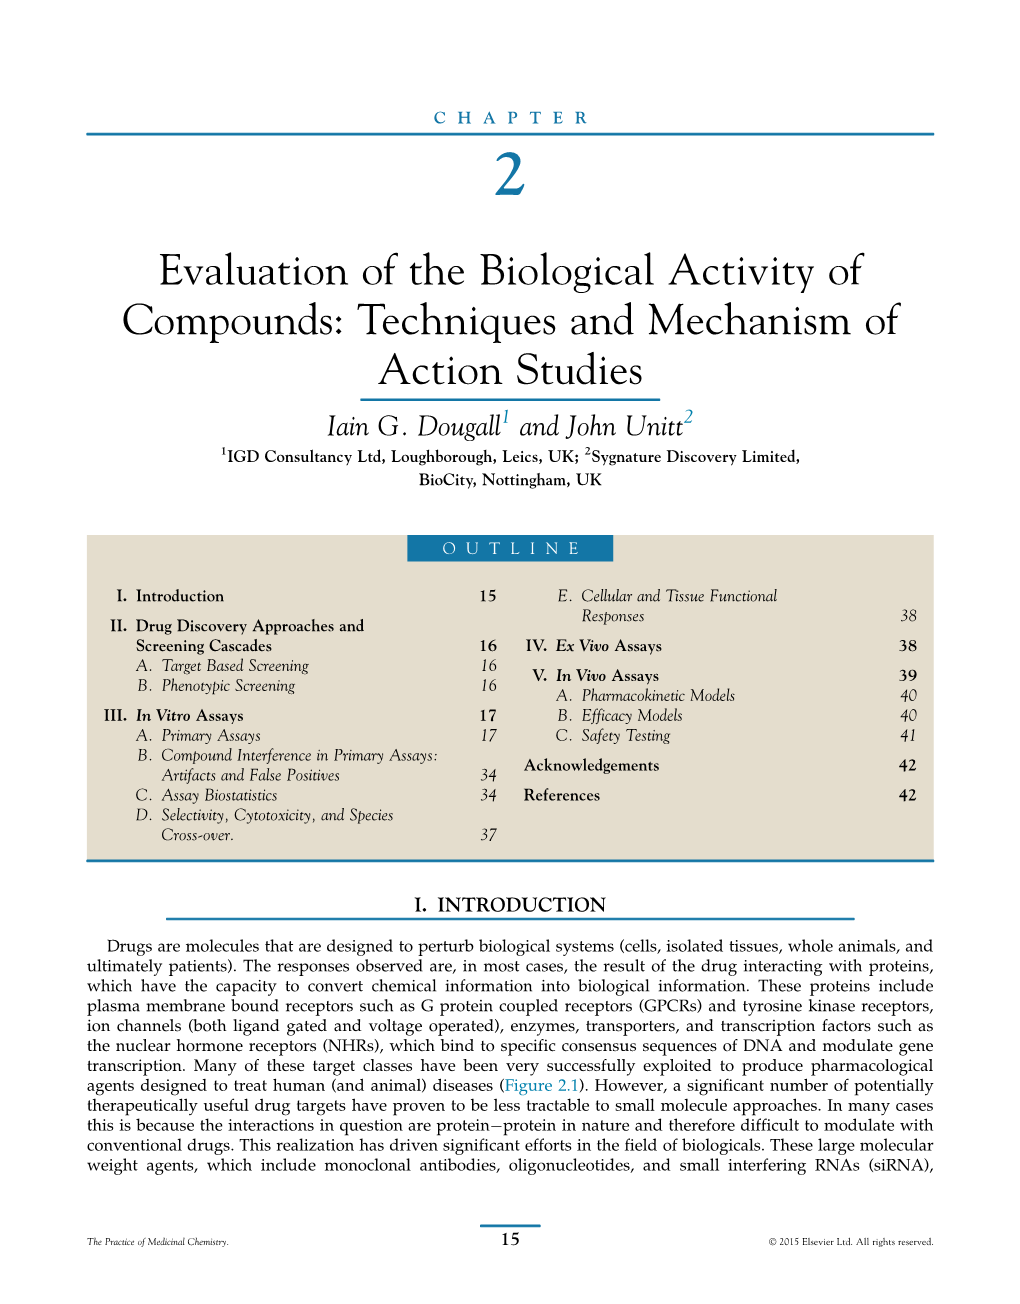 Evaluation of the Biological Activity of Compounds: Techniques and Mechanism of Action Studies Iain G